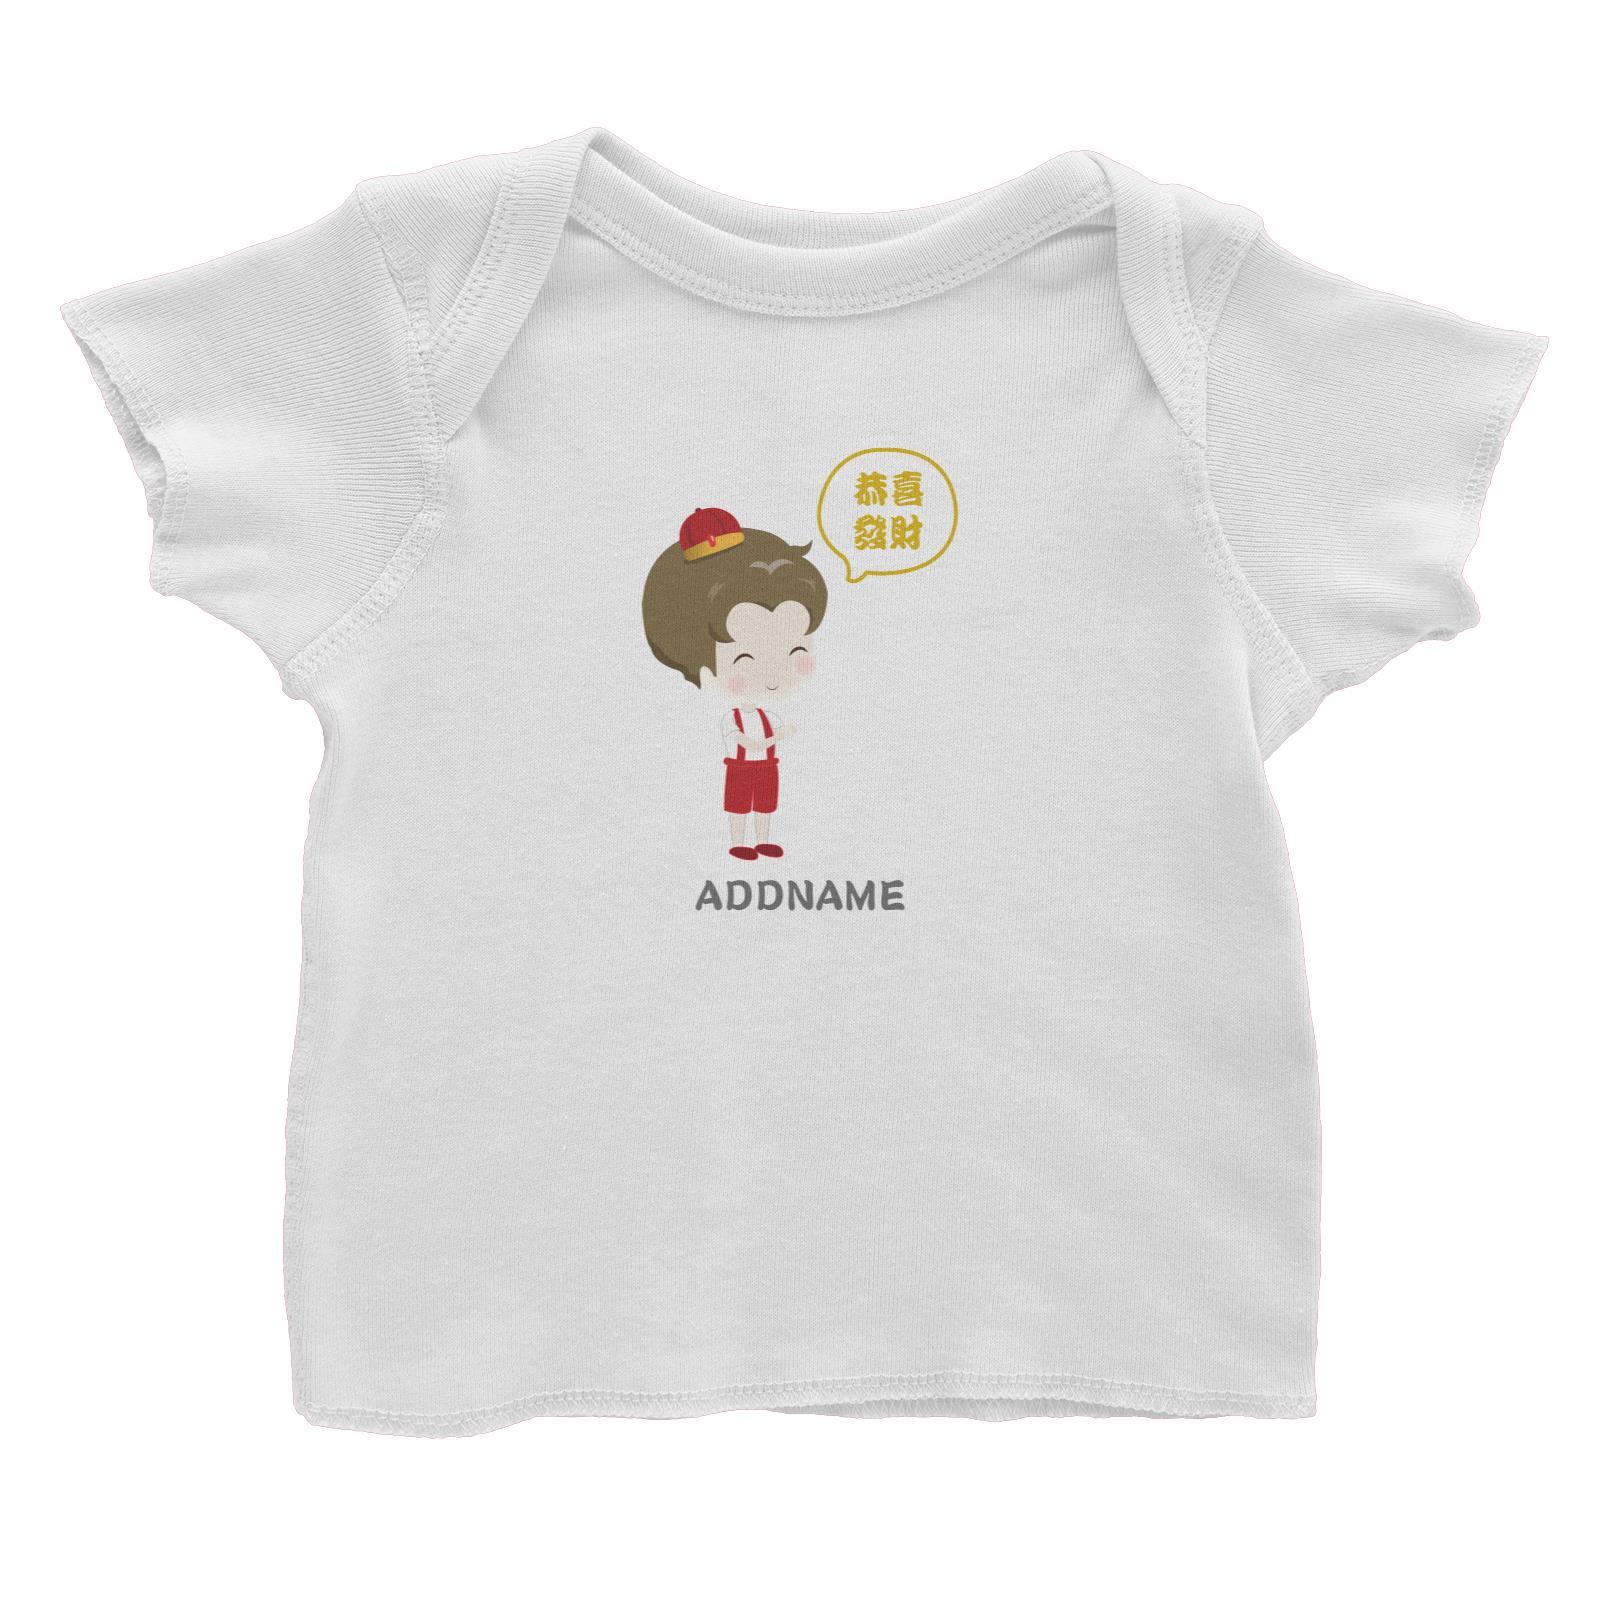 Chinese New Year Family Gong Xi Fai Cai Boy Addname Baby T-Shirt